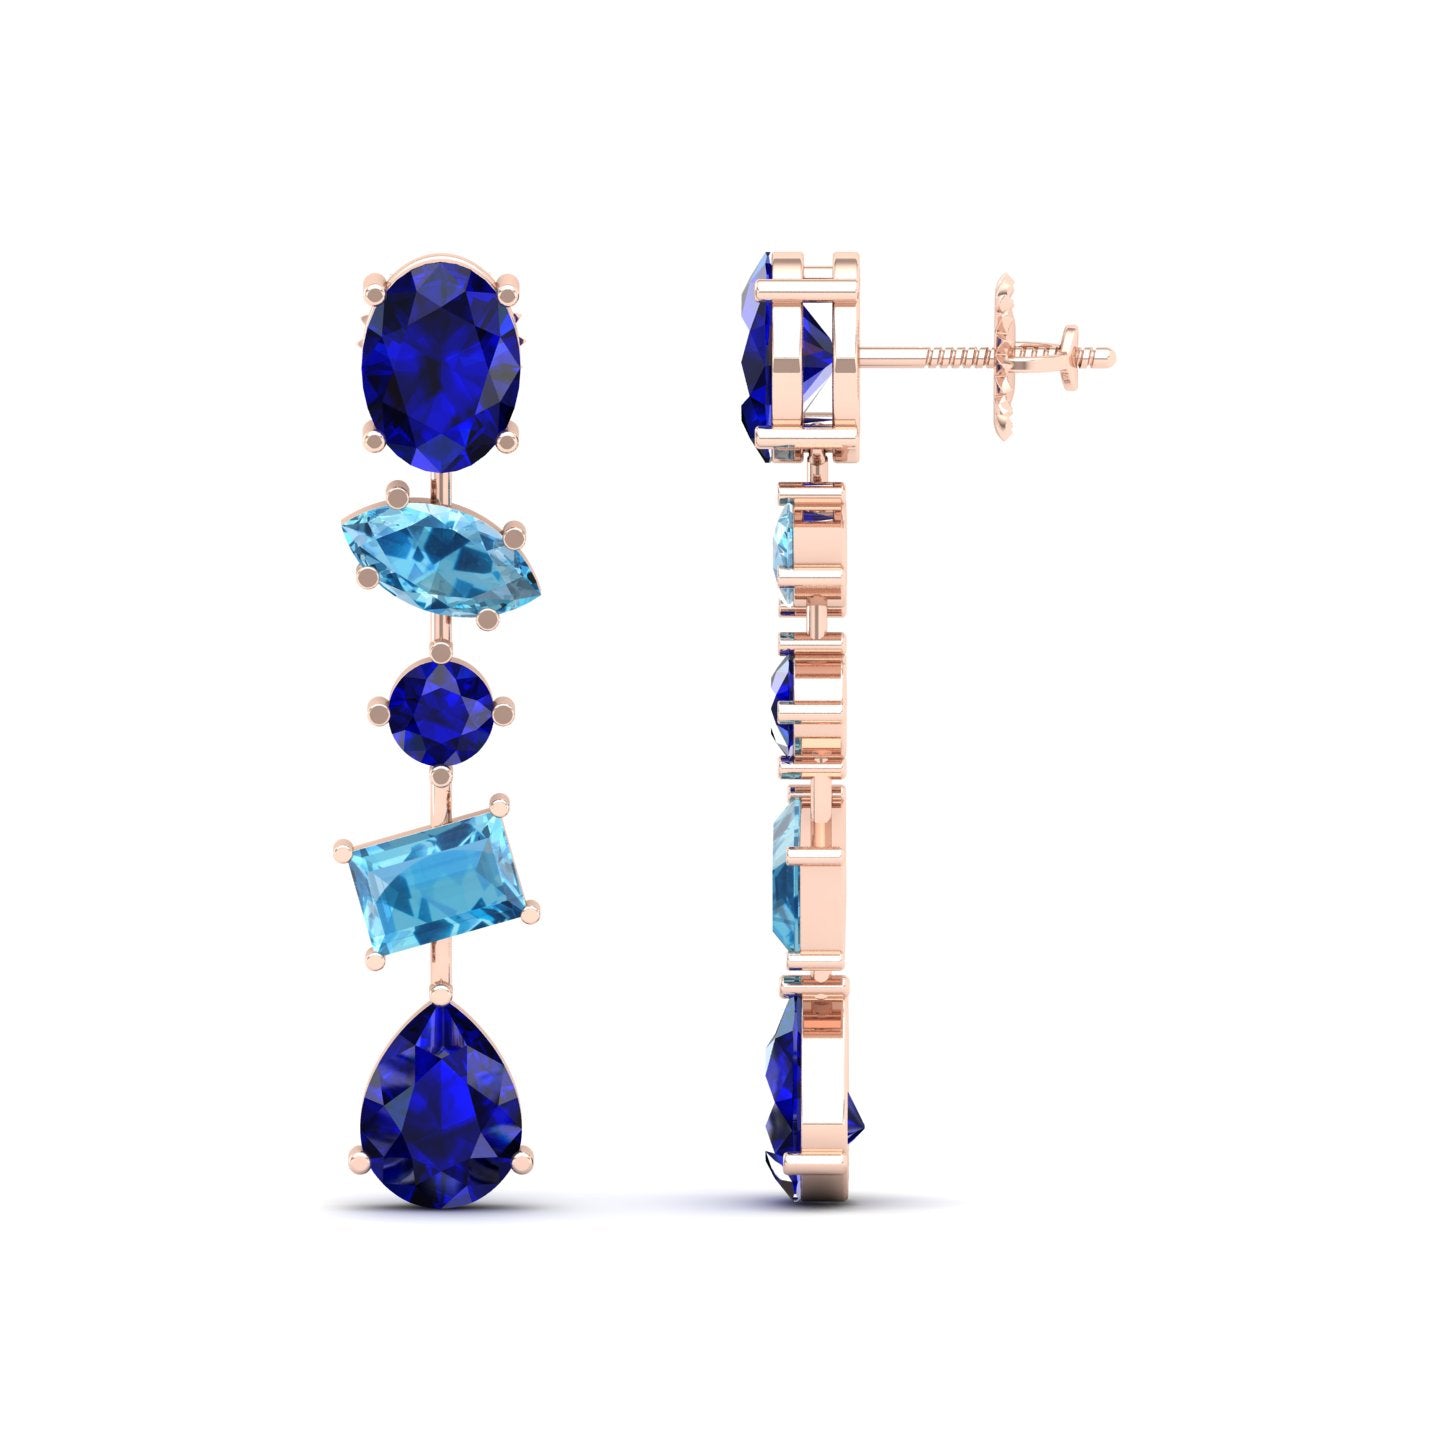 Maurya Crystals Drop Earrings with Sapphire and Topaz